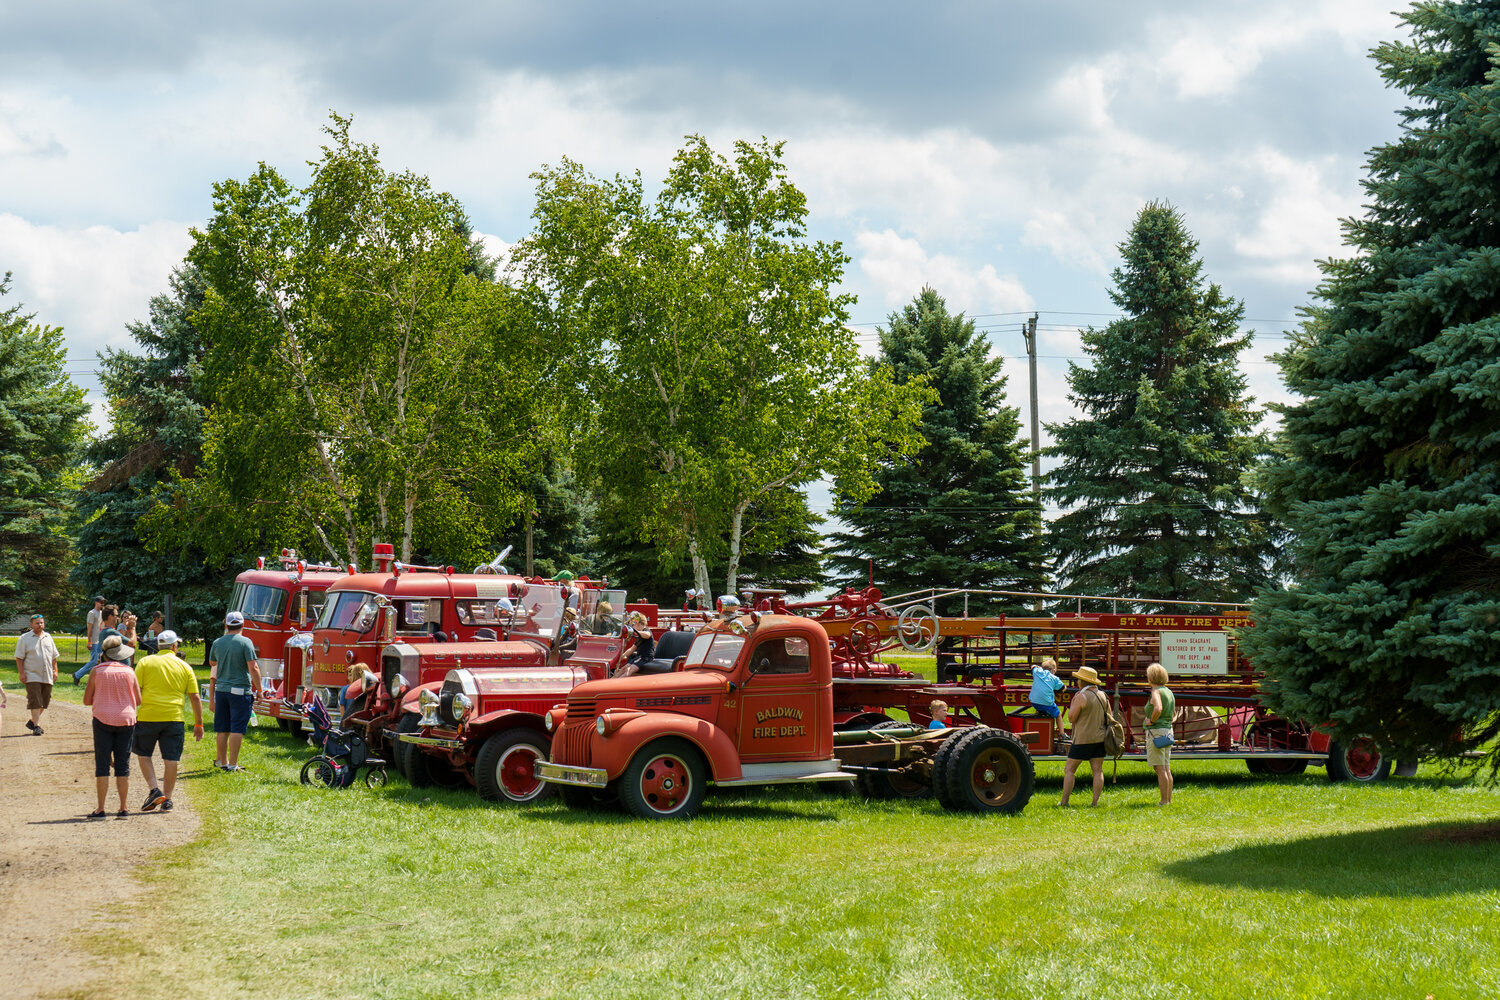 Antique fire trucks are always entertaining to check out, even being old technology compared to today’s high tech fire trucks, many of these can and do still function, only now, they are operated by private enthusiasts.